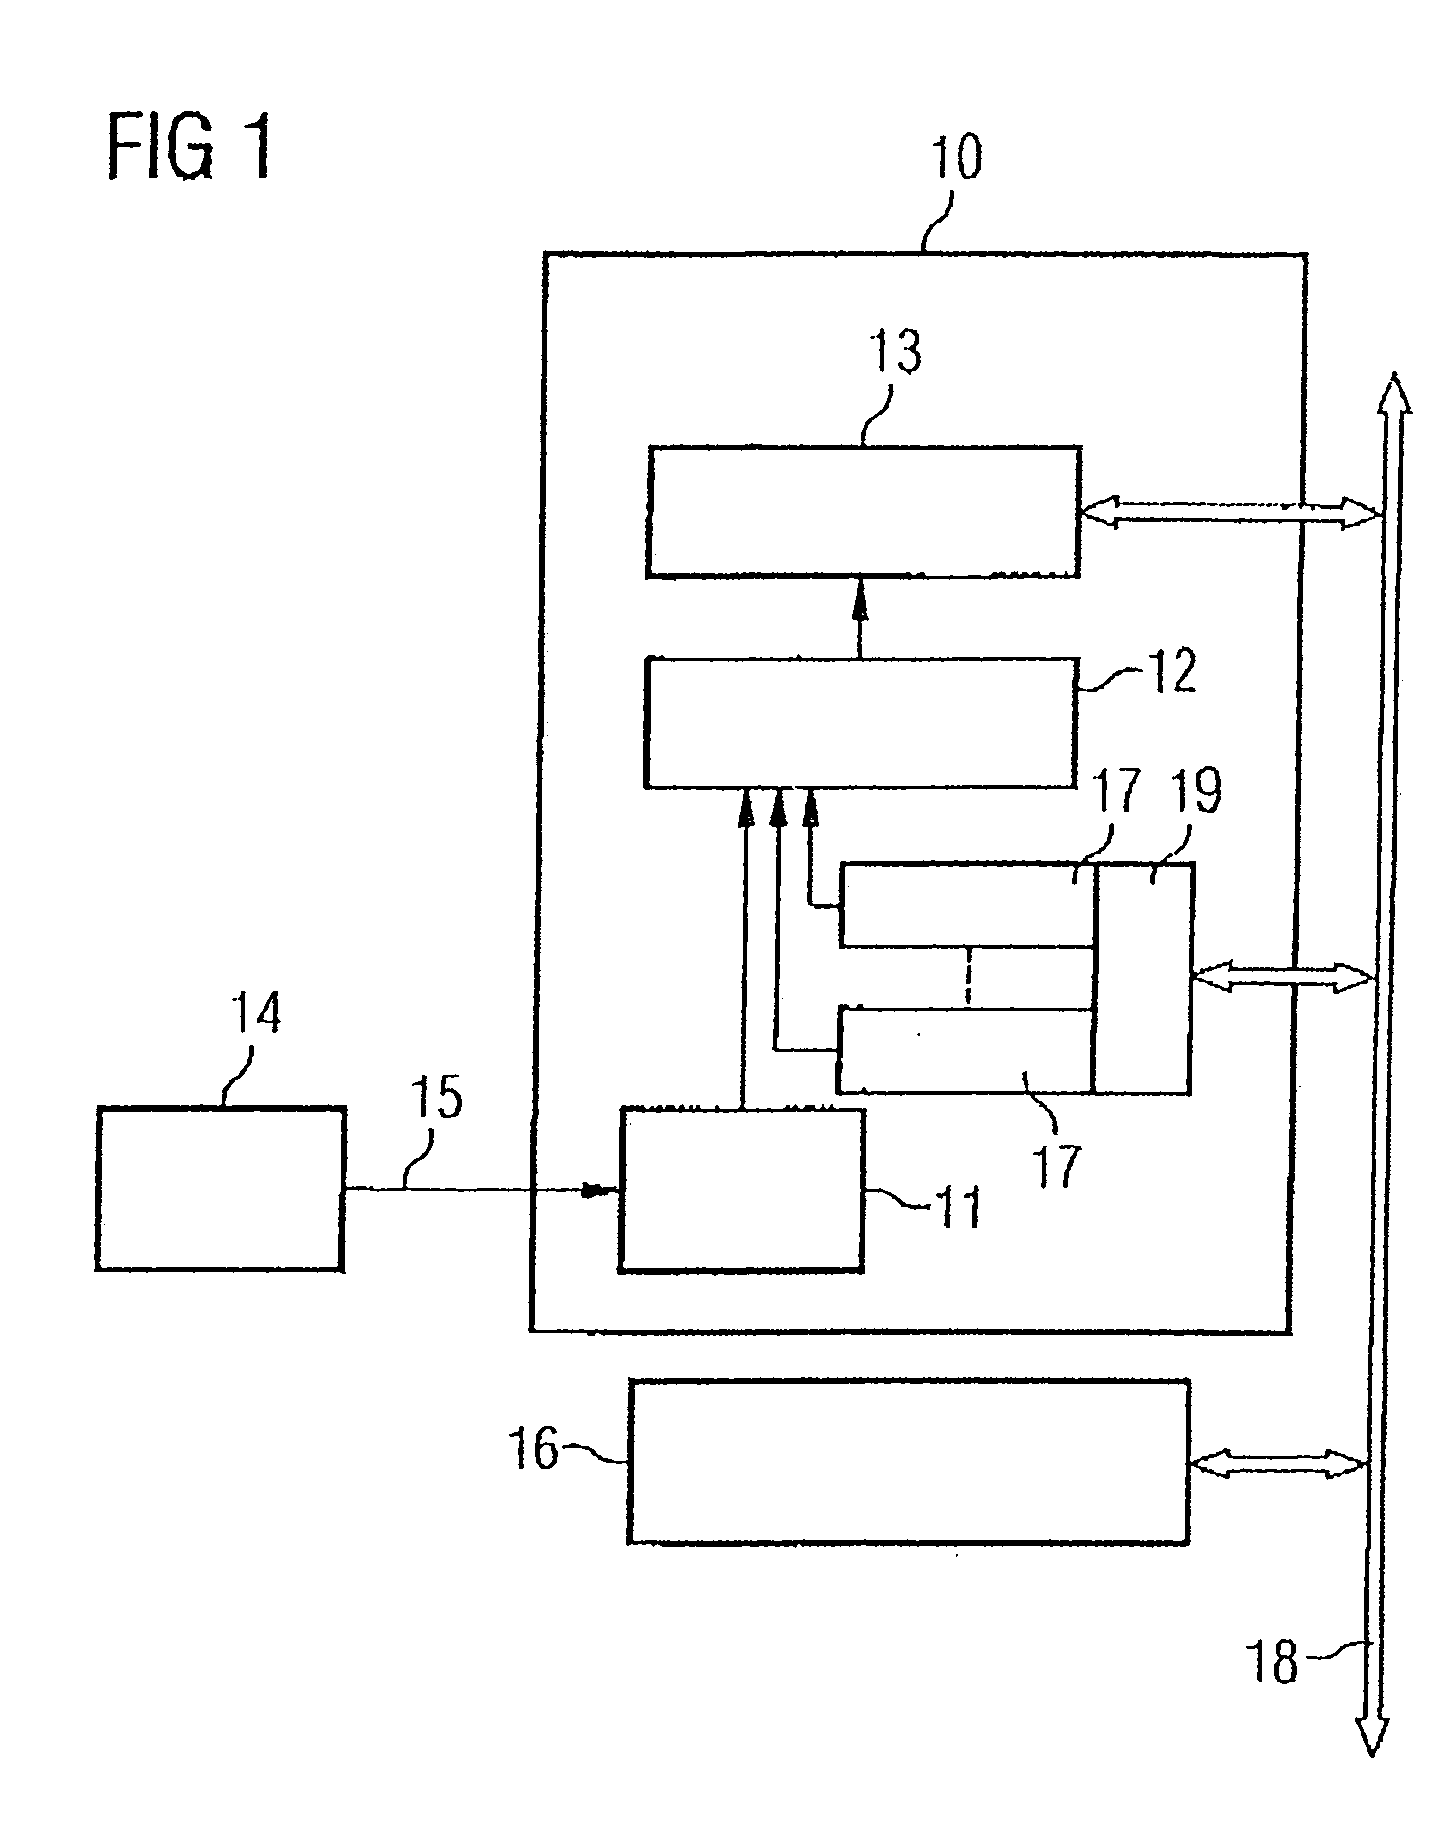 Apparatus and method for time control of the processing of a radio signal in a mobile station